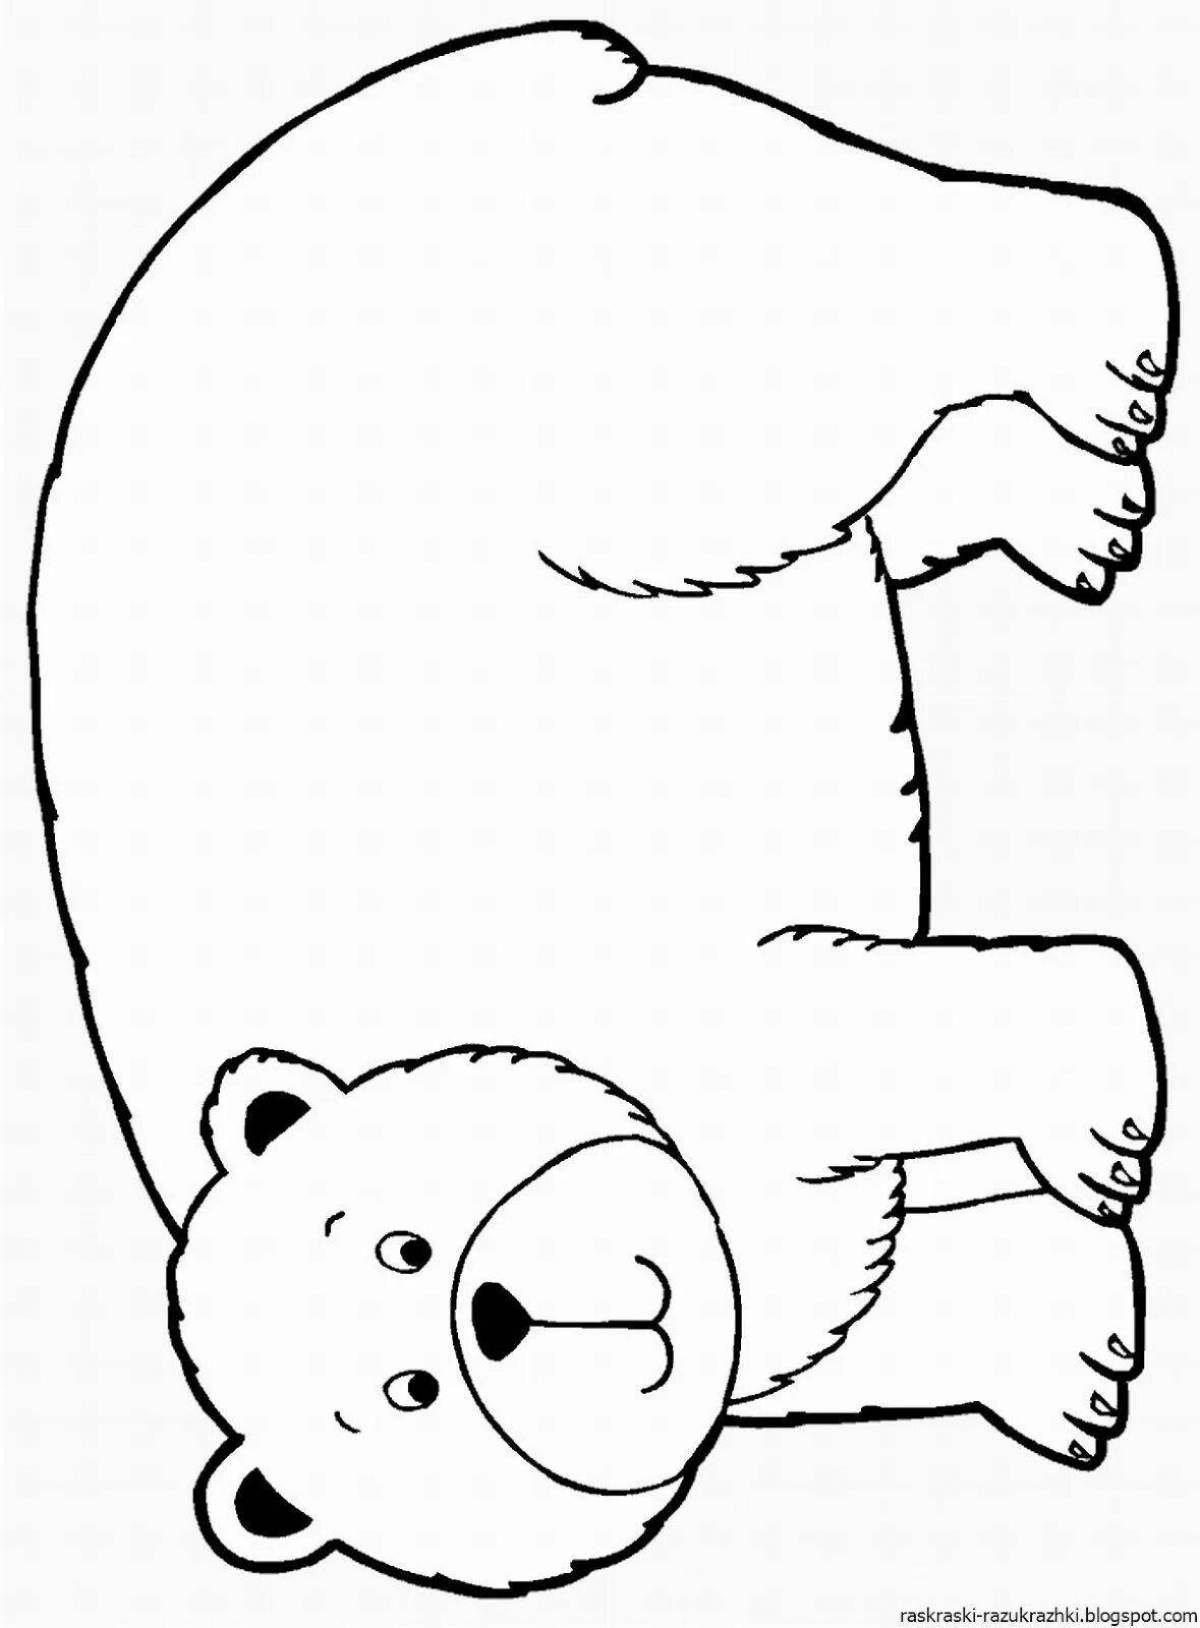 Gorgeous bear coloring book for kids